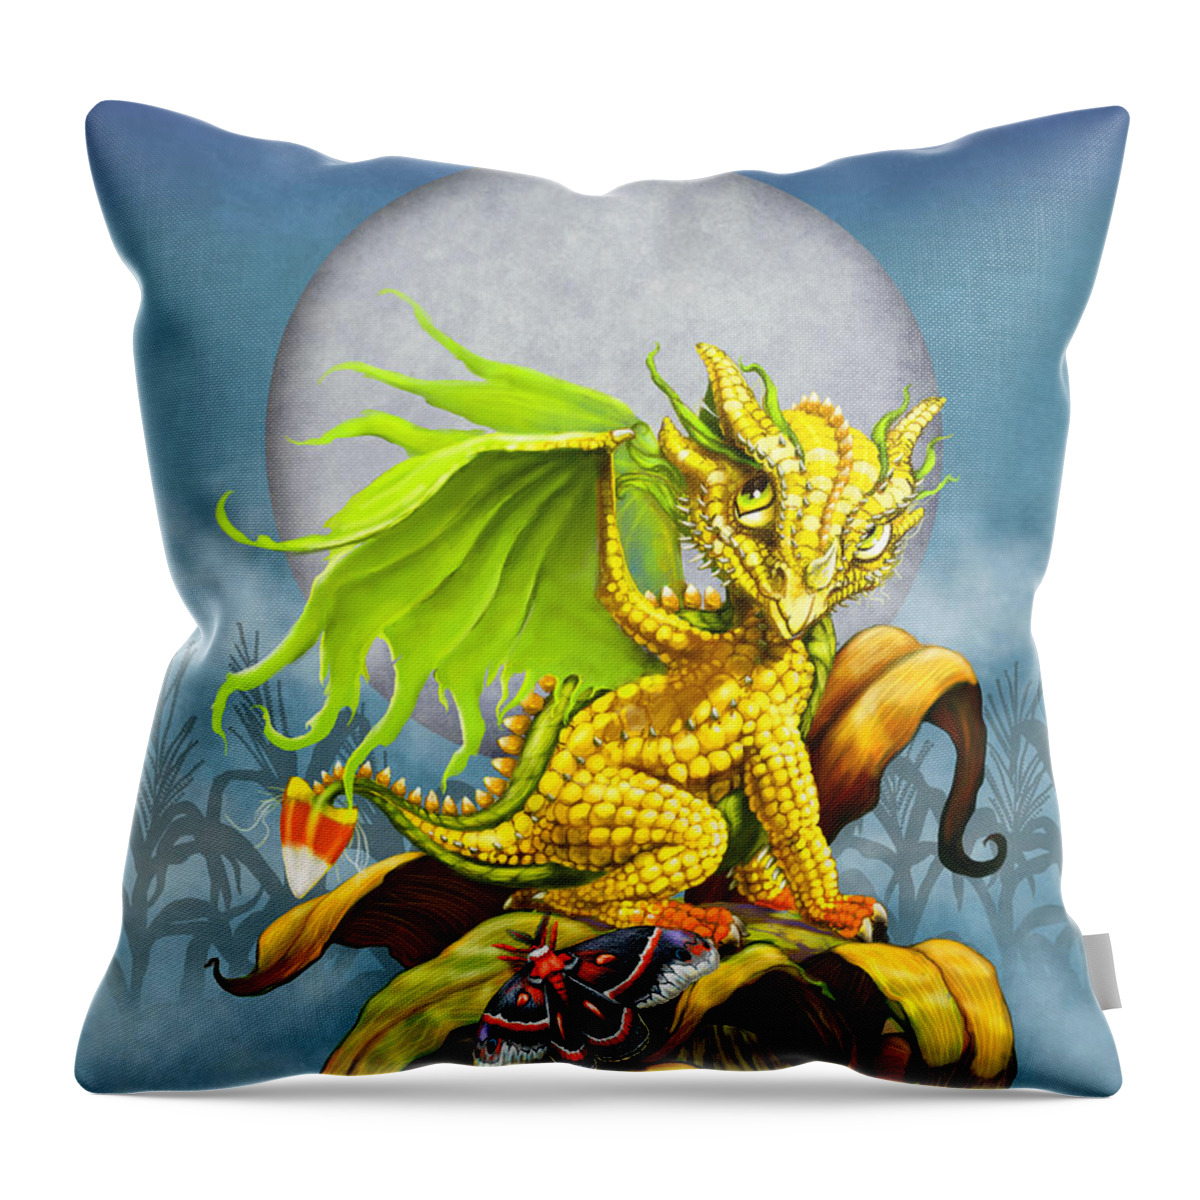 Dragon Throw Pillow featuring the digital art Corn Dragon by Stanley Morrison